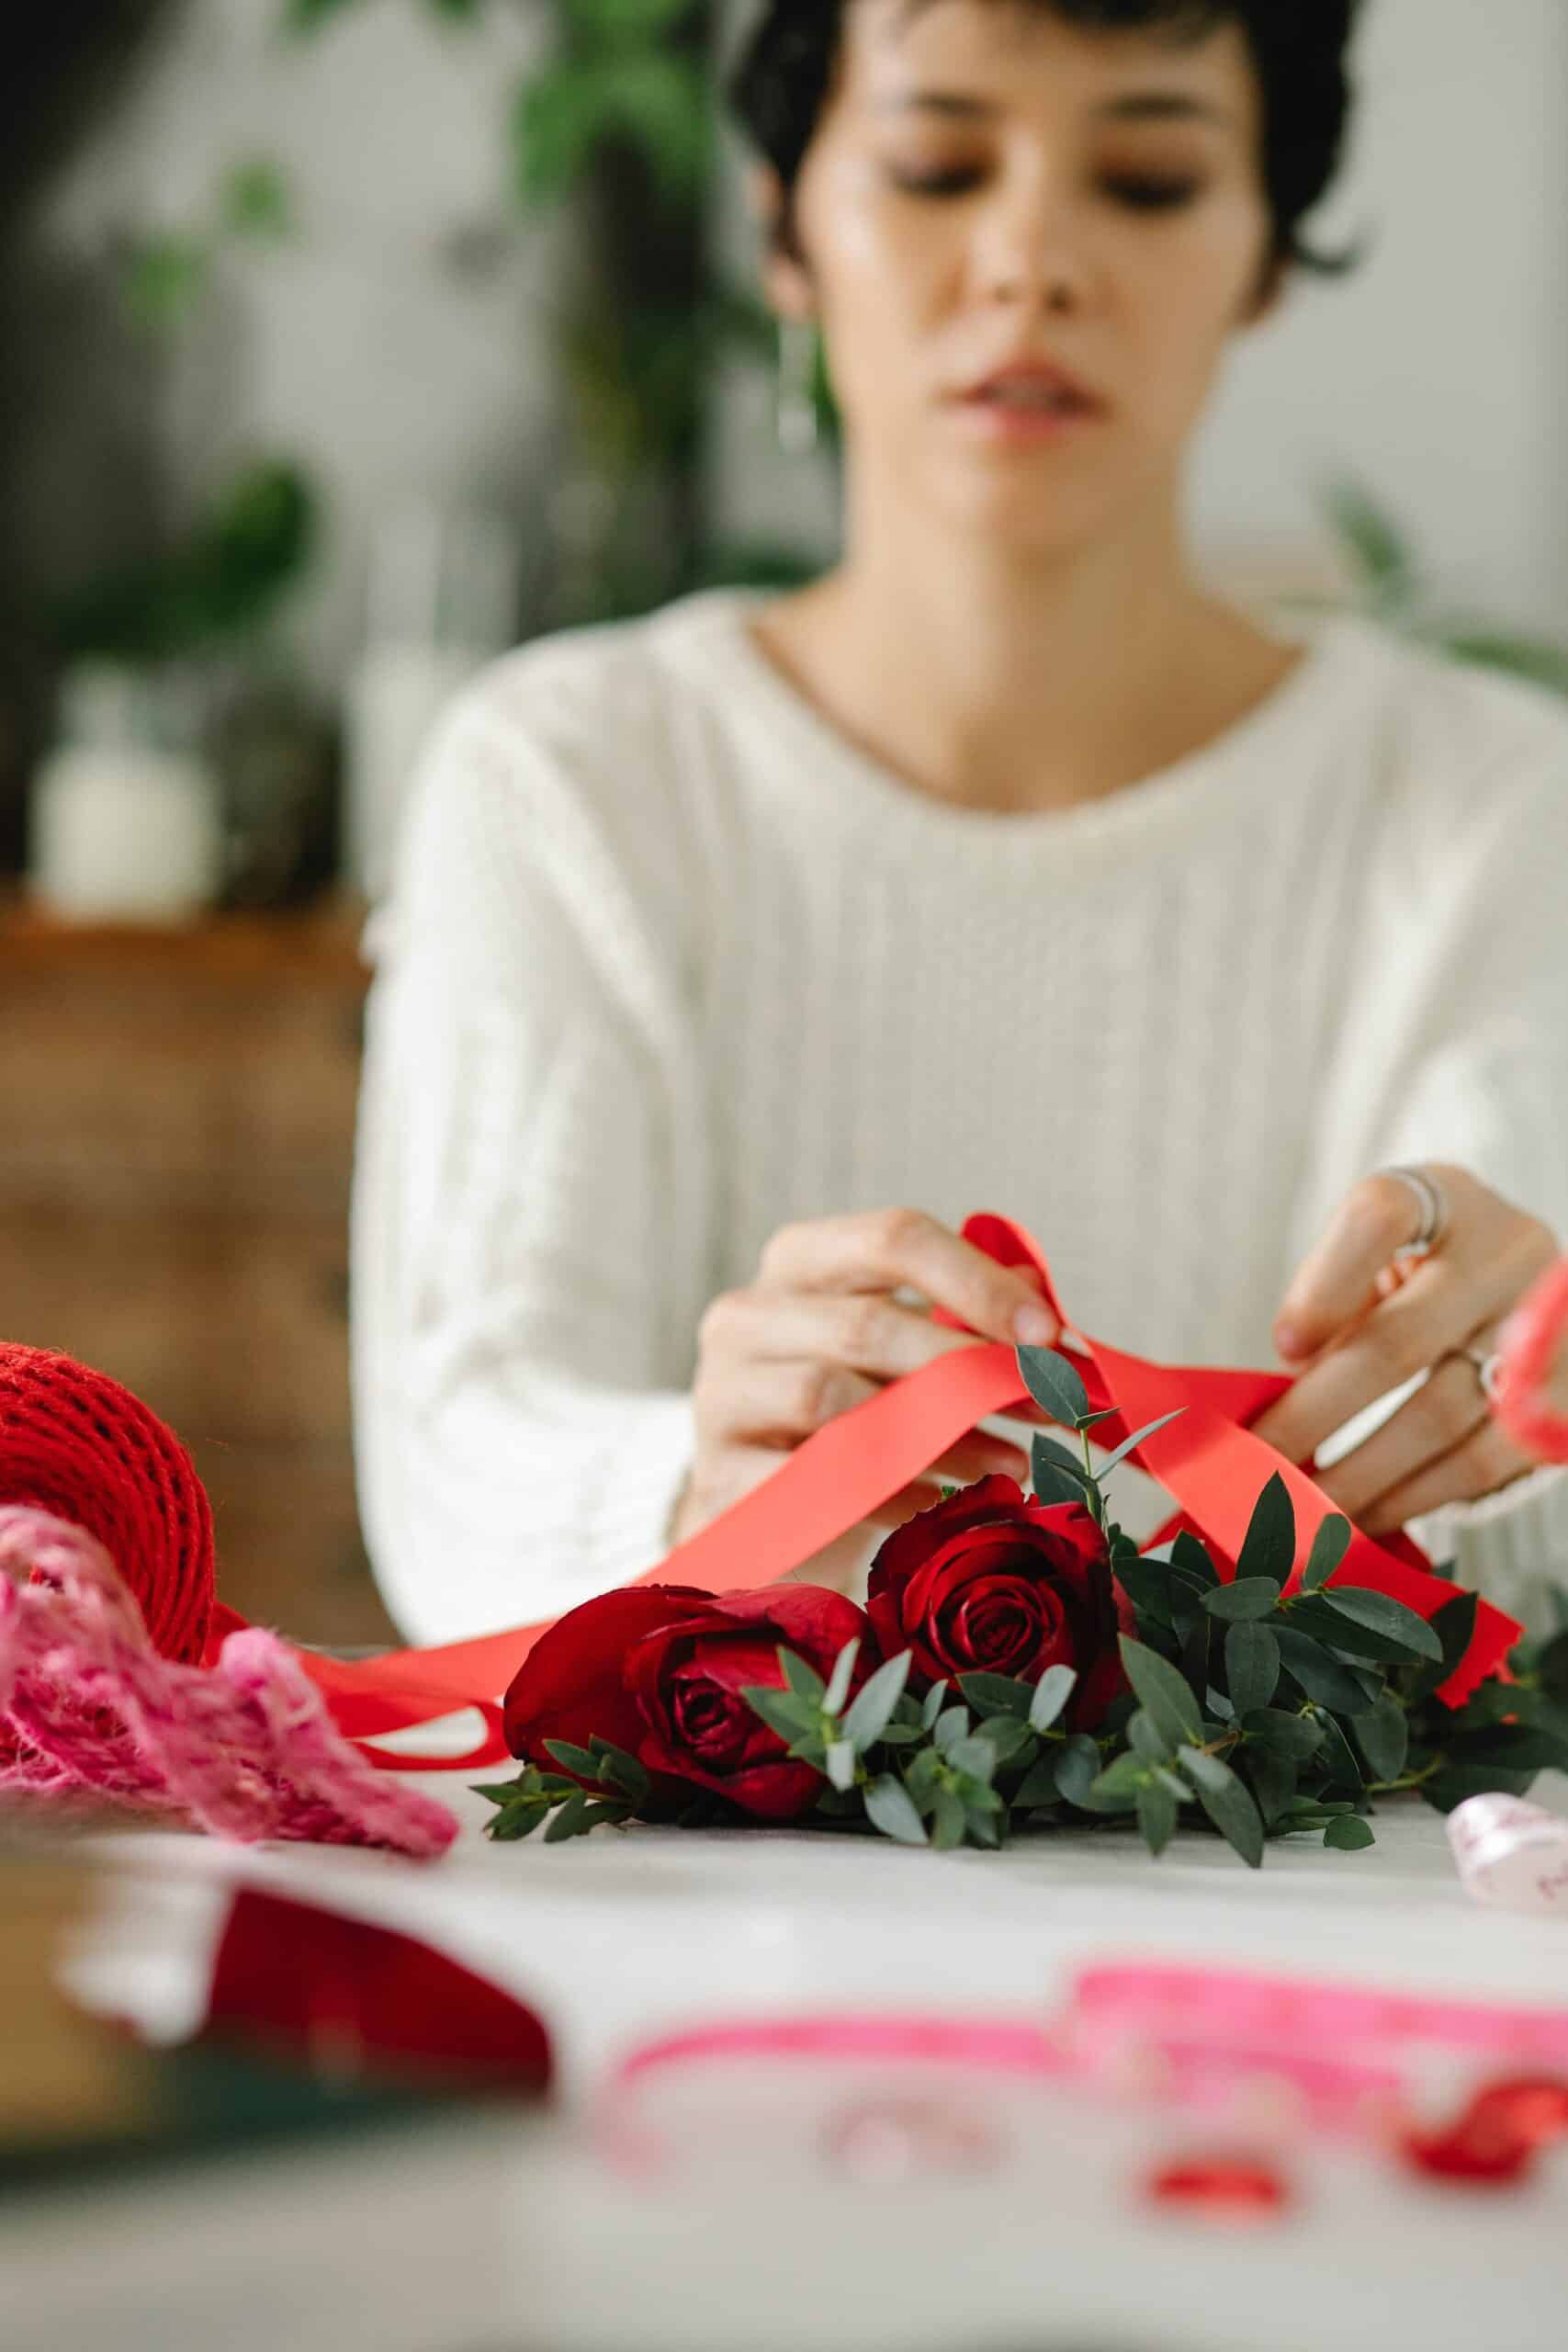 Event Vendor Photo by Michelle Leman: https://www.pexels.com/photo/young-ethnic-female-florist-tying-bow-on-bunch-of-red-roses-6765765/